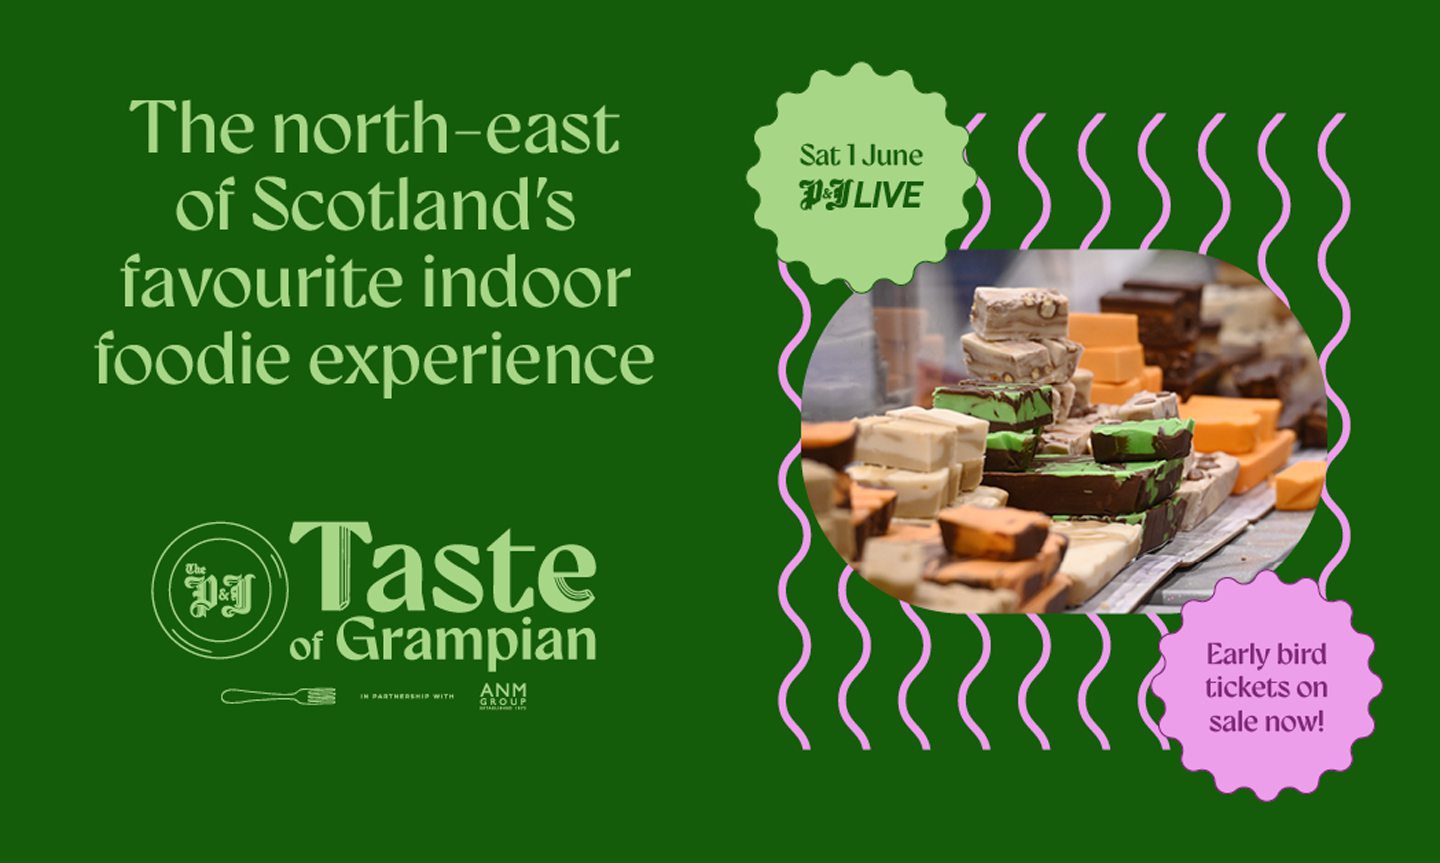 The north-east of Scotland's favourite indoor foodie experience, Taste of Grampian